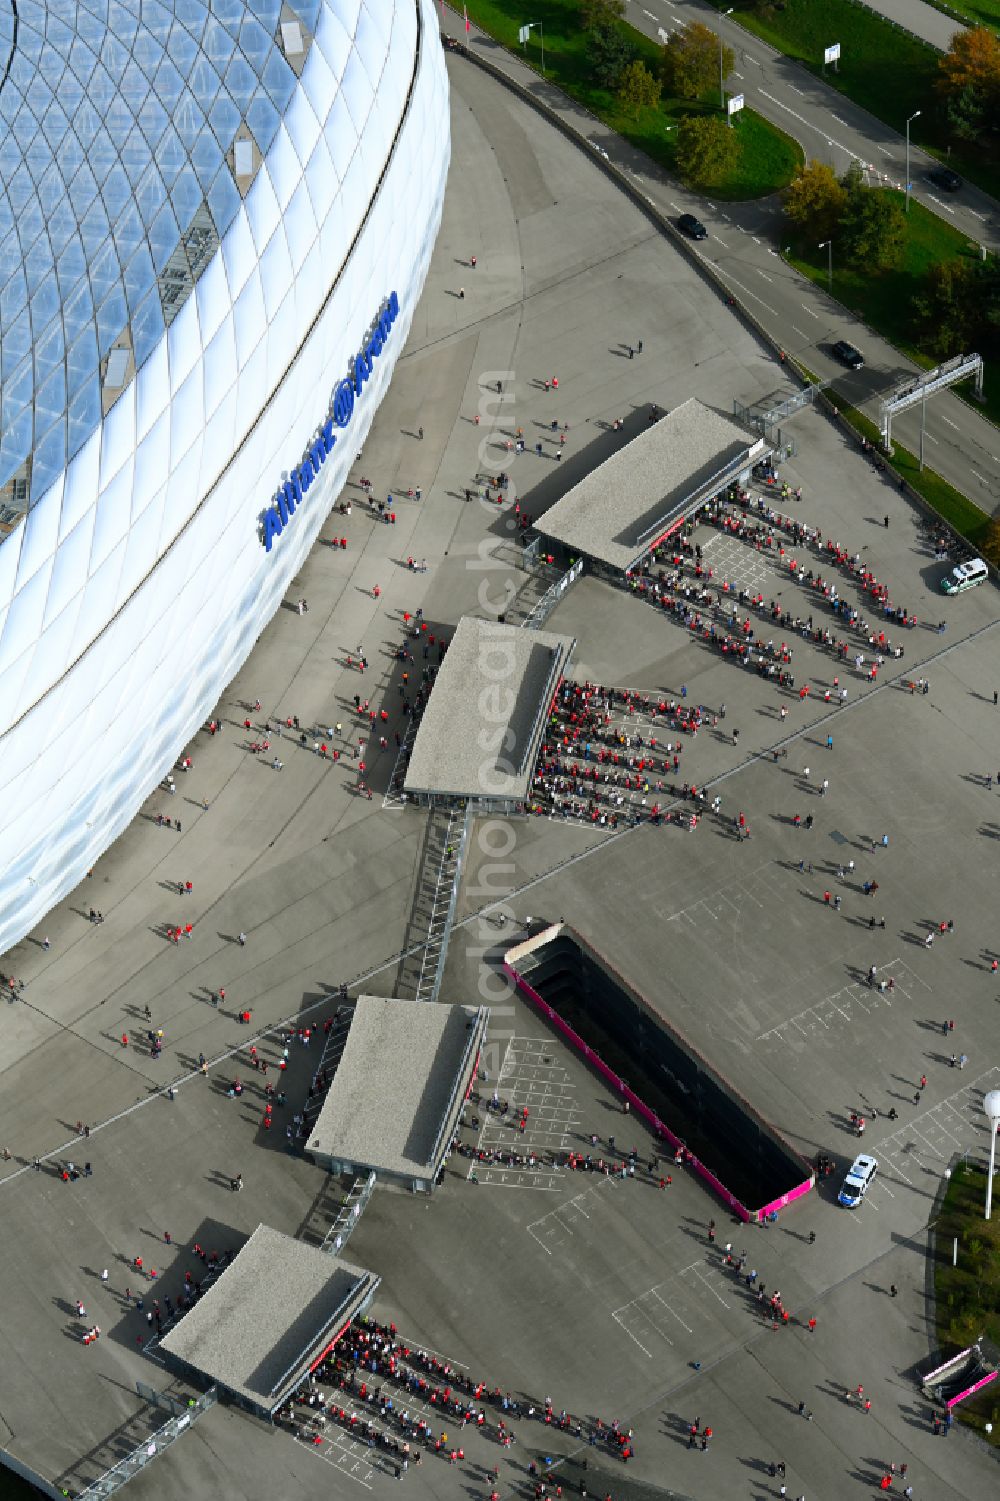 Aerial image München - Crowds of people in front of the entrance control of football fans at the entrances to the security check on the sports facility grounds of the arena of the stadium Allianz Arena on Werner-Heisenberg-Allee in the district Freimann in Munich in the state Bavaria, Germany